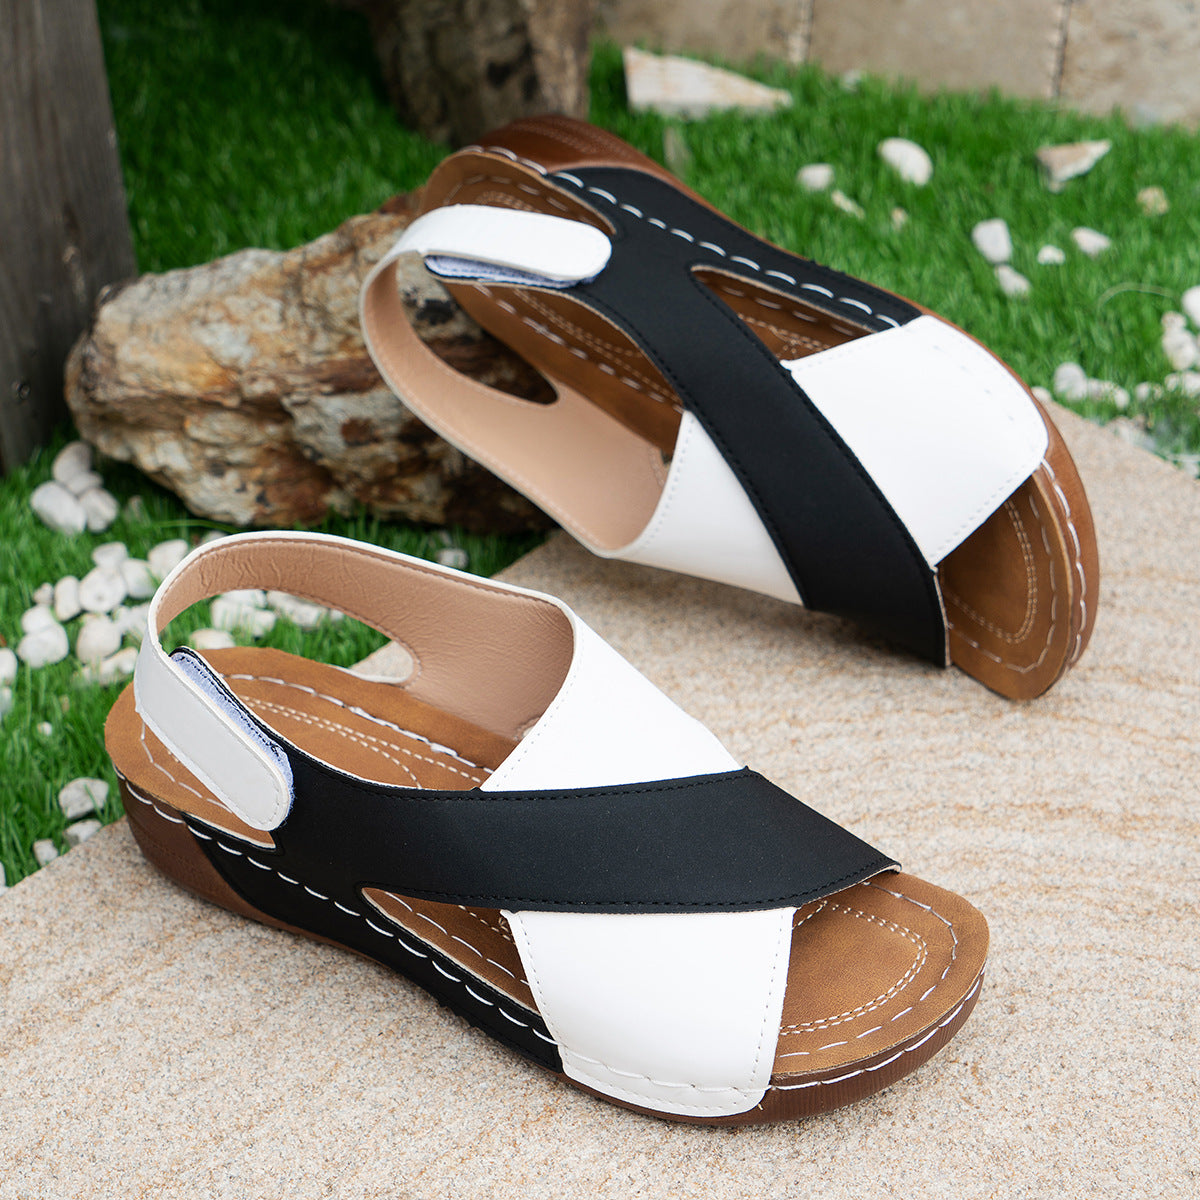 Summer Wedges Sandals With Colorblock Cross-strap Design Casual Thick-soled Roman Shoes For Women